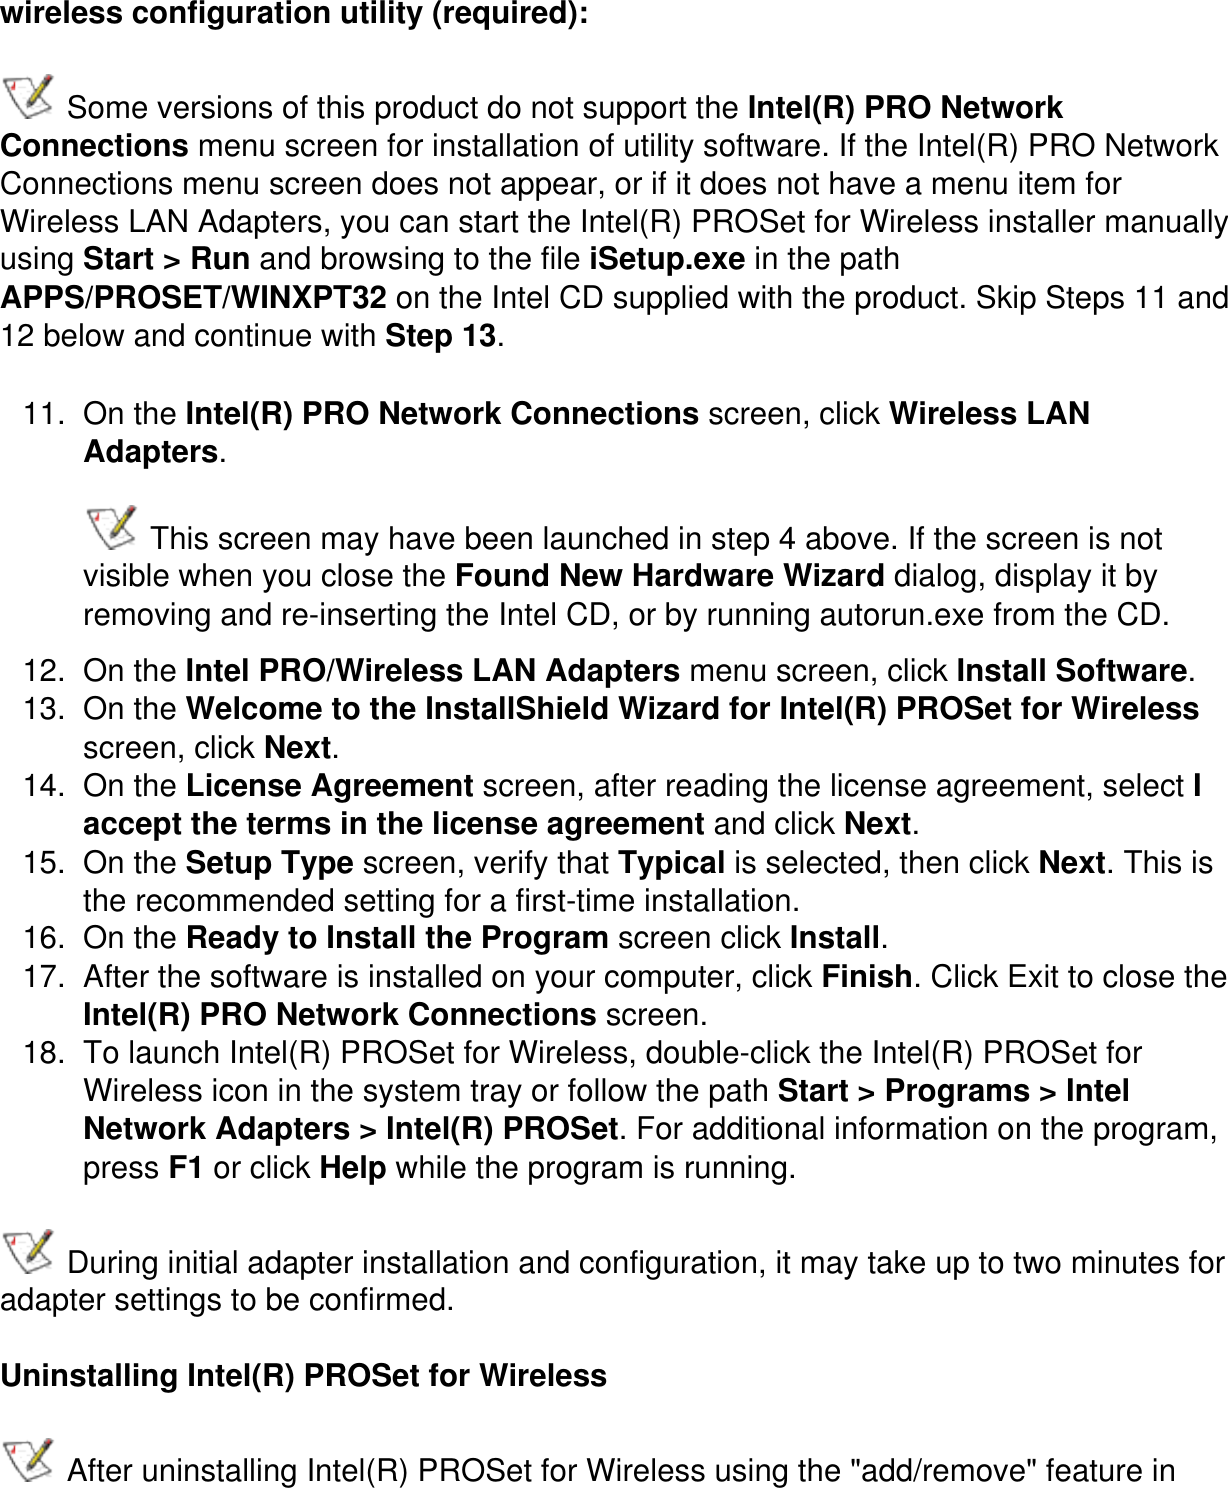 wireless configuration utility (required): Some versions of this product do not support the Intel(R) PRO Network Connections menu screen for installation of utility software. If the Intel(R) PRO Network Connections menu screen does not appear, or if it does not have a menu item for Wireless LAN Adapters, you can start the Intel(R) PROSet for Wireless installer manually using Start &gt; Run and browsing to the file iSetup.exe in the path APPS/PROSET/WINXPT32 on the Intel CD supplied with the product. Skip Steps 11 and 12 below and continue with Step 13.11.  On the Intel(R) PRO Network Connections screen, click Wireless LAN Adapters.  This screen may have been launched in step 4 above. If the screen is not visible when you close the Found New Hardware Wizard dialog, display it by removing and re-inserting the Intel CD, or by running autorun.exe from the CD.12.  On the Intel PRO/Wireless LAN Adapters menu screen, click Install Software. 13.  On the Welcome to the InstallShield Wizard for Intel(R) PROSet for Wireless screen, click Next.14.  On the License Agreement screen, after reading the license agreement, select I accept the terms in the license agreement and click Next.15.  On the Setup Type screen, verify that Typical is selected, then click Next. This is the recommended setting for a first-time installation.16.  On the Ready to Install the Program screen click Install.17.  After the software is installed on your computer, click Finish. Click Exit to close the Intel(R) PRO Network Connections screen.18.  To launch Intel(R) PROSet for Wireless, double-click the Intel(R) PROSet for Wireless icon in the system tray or follow the path Start &gt; Programs &gt; Intel Network Adapters &gt; Intel(R) PROSet. For additional information on the program, press F1 or click Help while the program is running. During initial adapter installation and configuration, it may take up to two minutes for adapter settings to be confirmed.Uninstalling Intel(R) PROSet for Wireless After uninstalling Intel(R) PROSet for Wireless using the &quot;add/remove&quot; feature in 